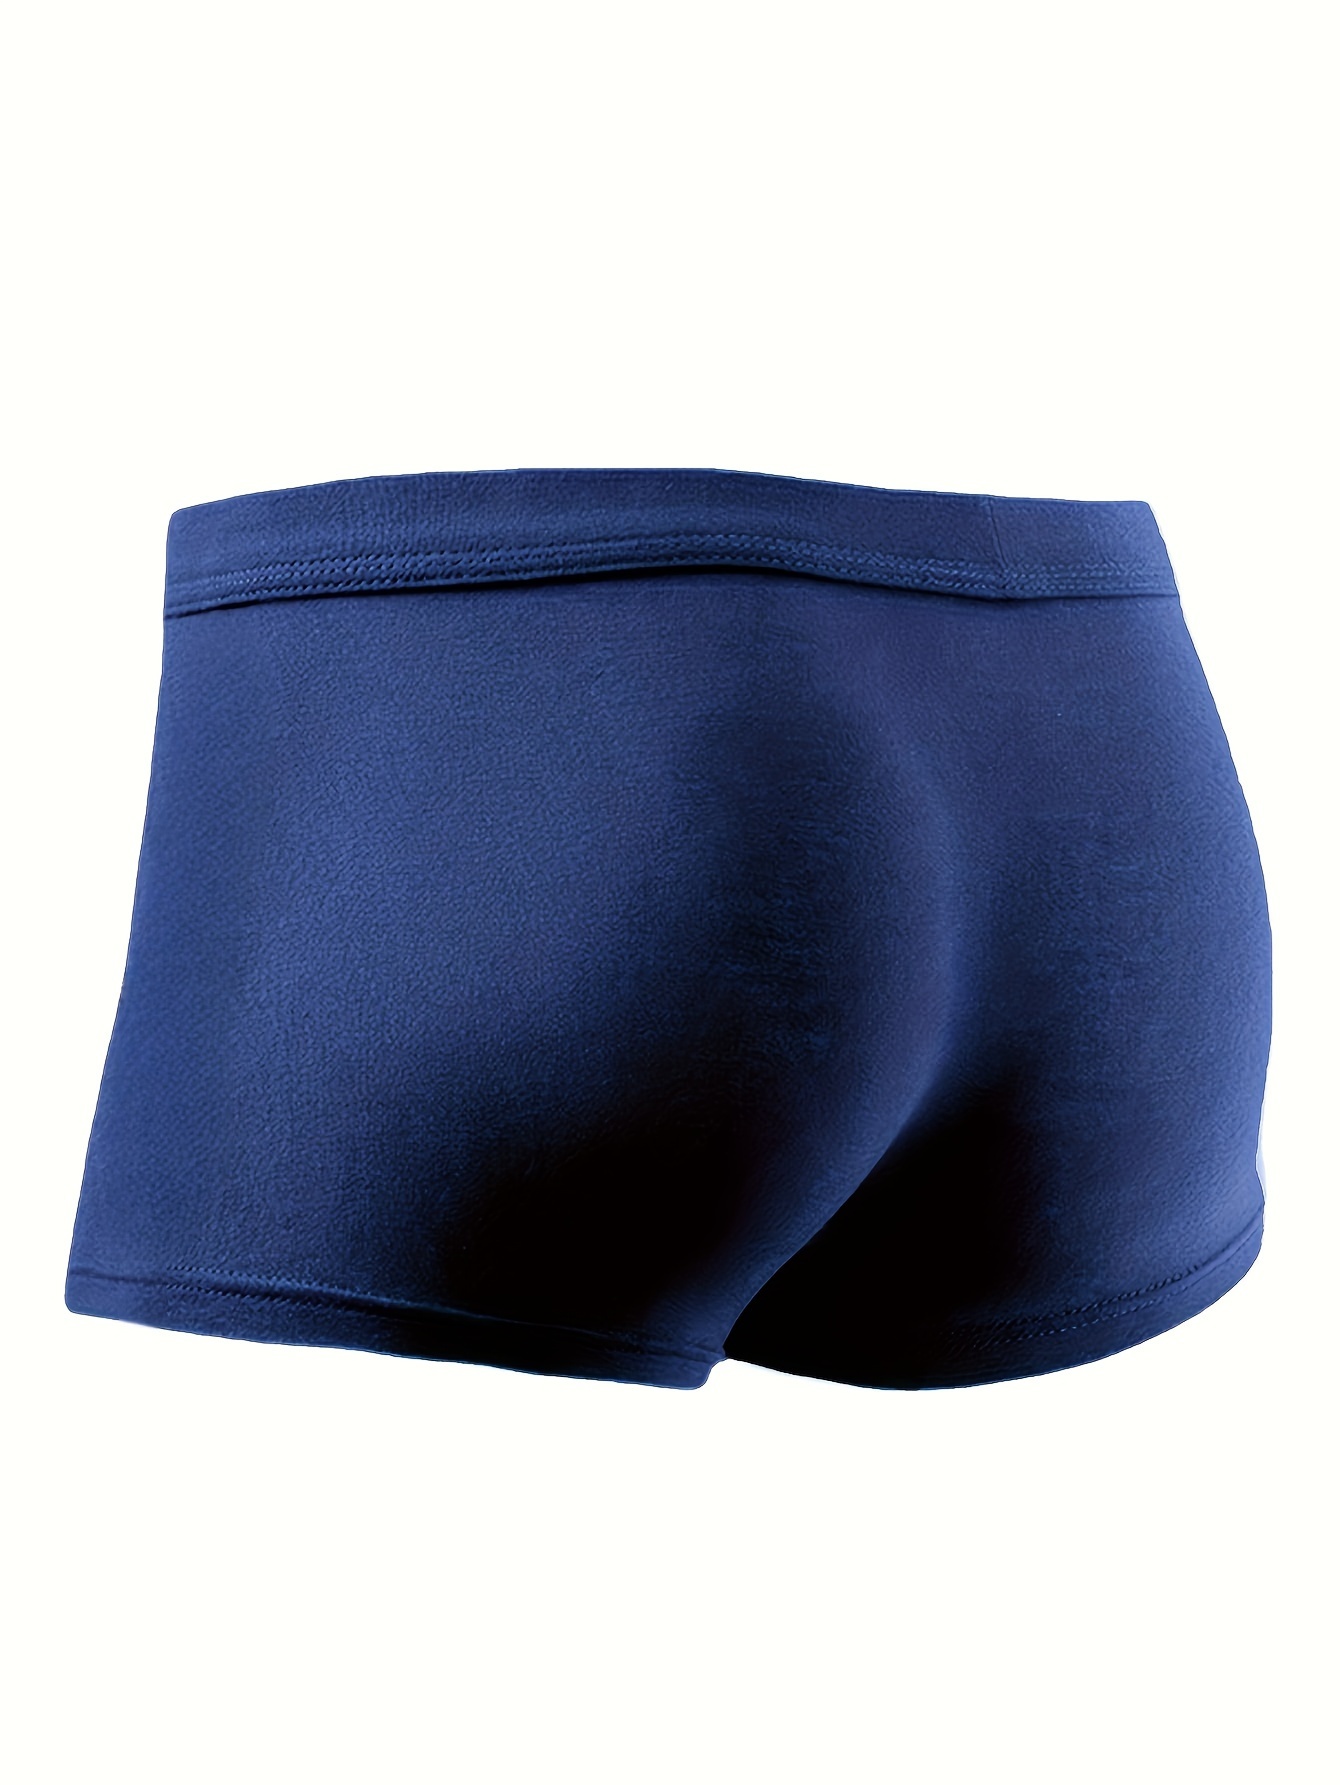 Mens Lightweight Breathable Modal Open Boxer Boxer Briefs With Pouch With  Anti Chafing Short Leg And Tagless Separate Dual Pouch Underwear From  Quentinde, $15.39